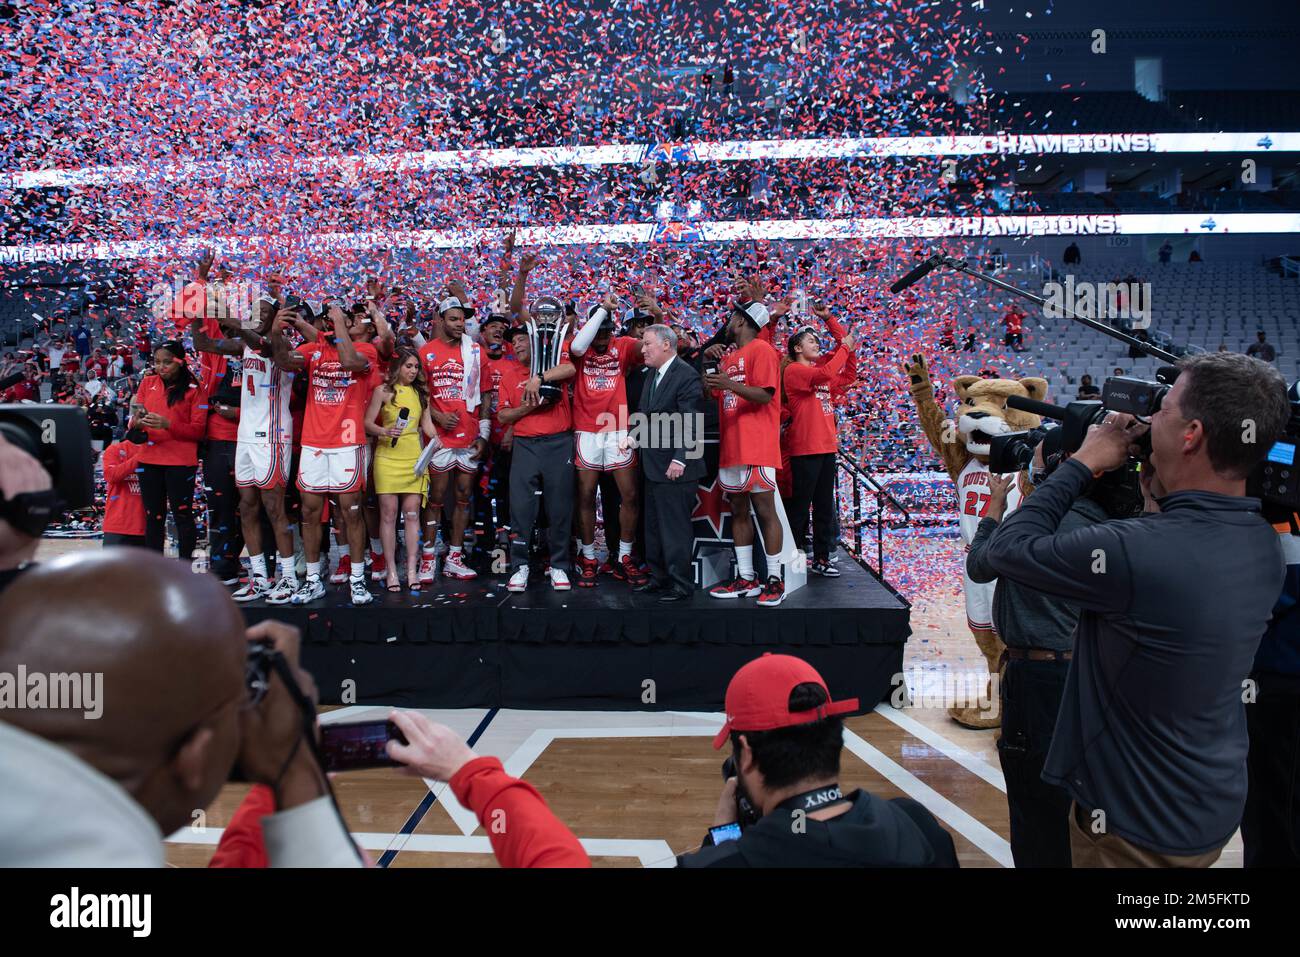 The University of Houston won the American Athletic Conference Championship, defeating the University of Memphis. Stock Photo